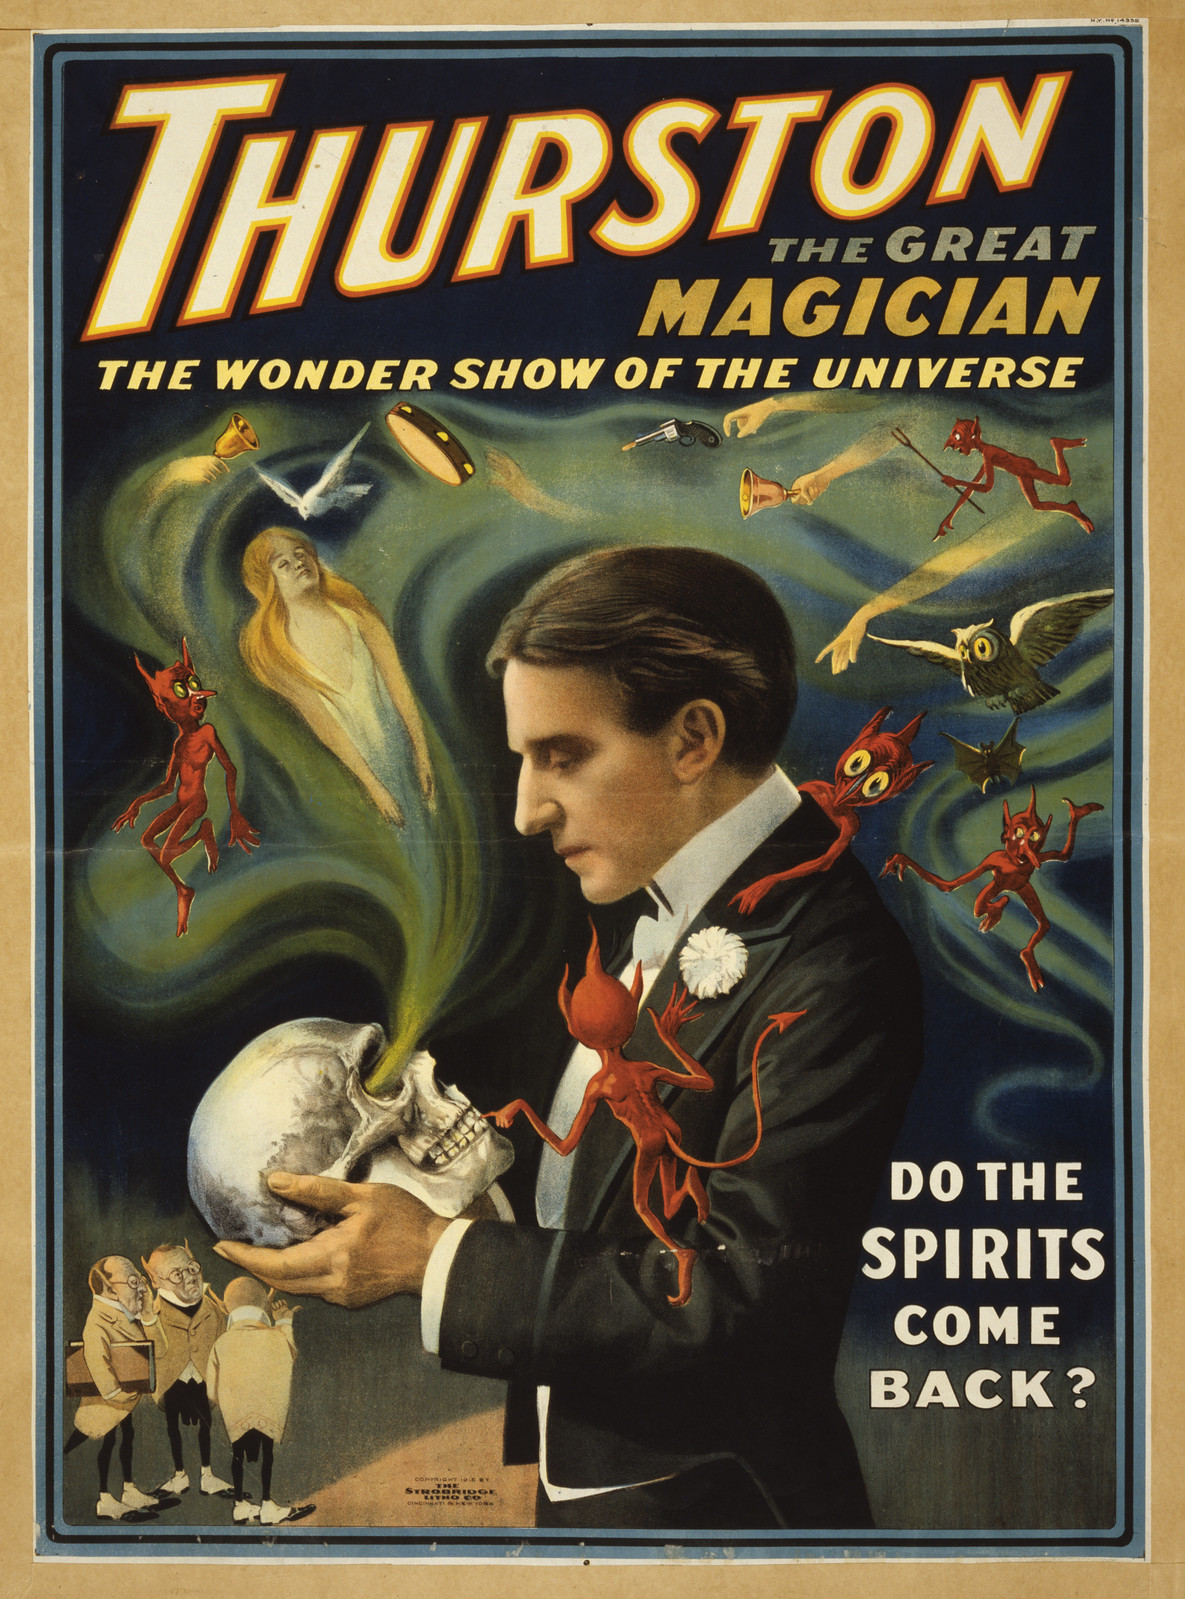 Thurston the great magician the wonder show of the universe, 1915